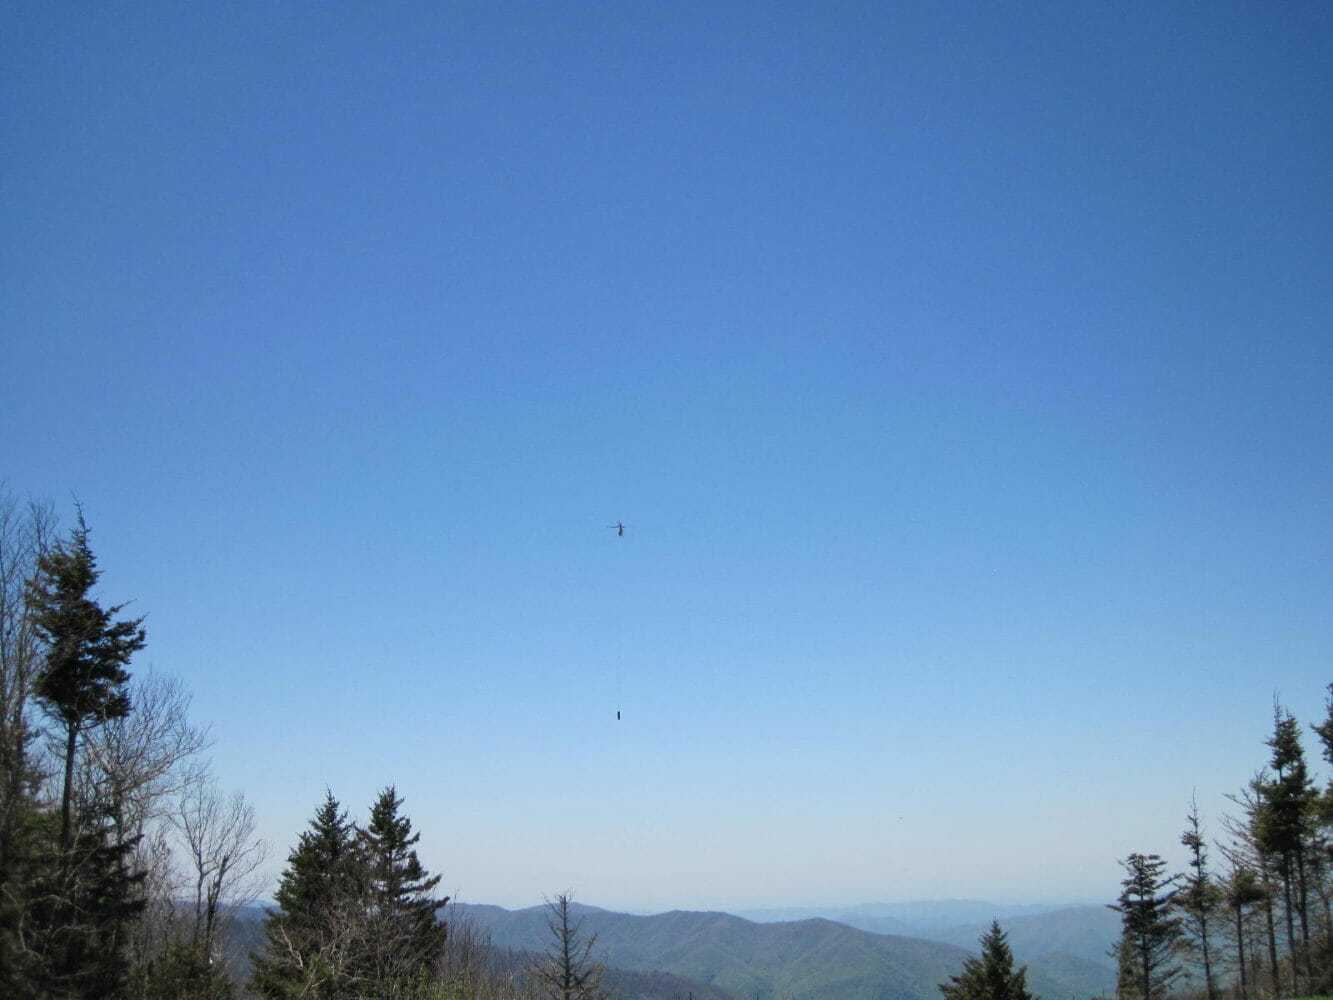 Helicopter carries the Locust logs to their destination - Great Smoky Mountains